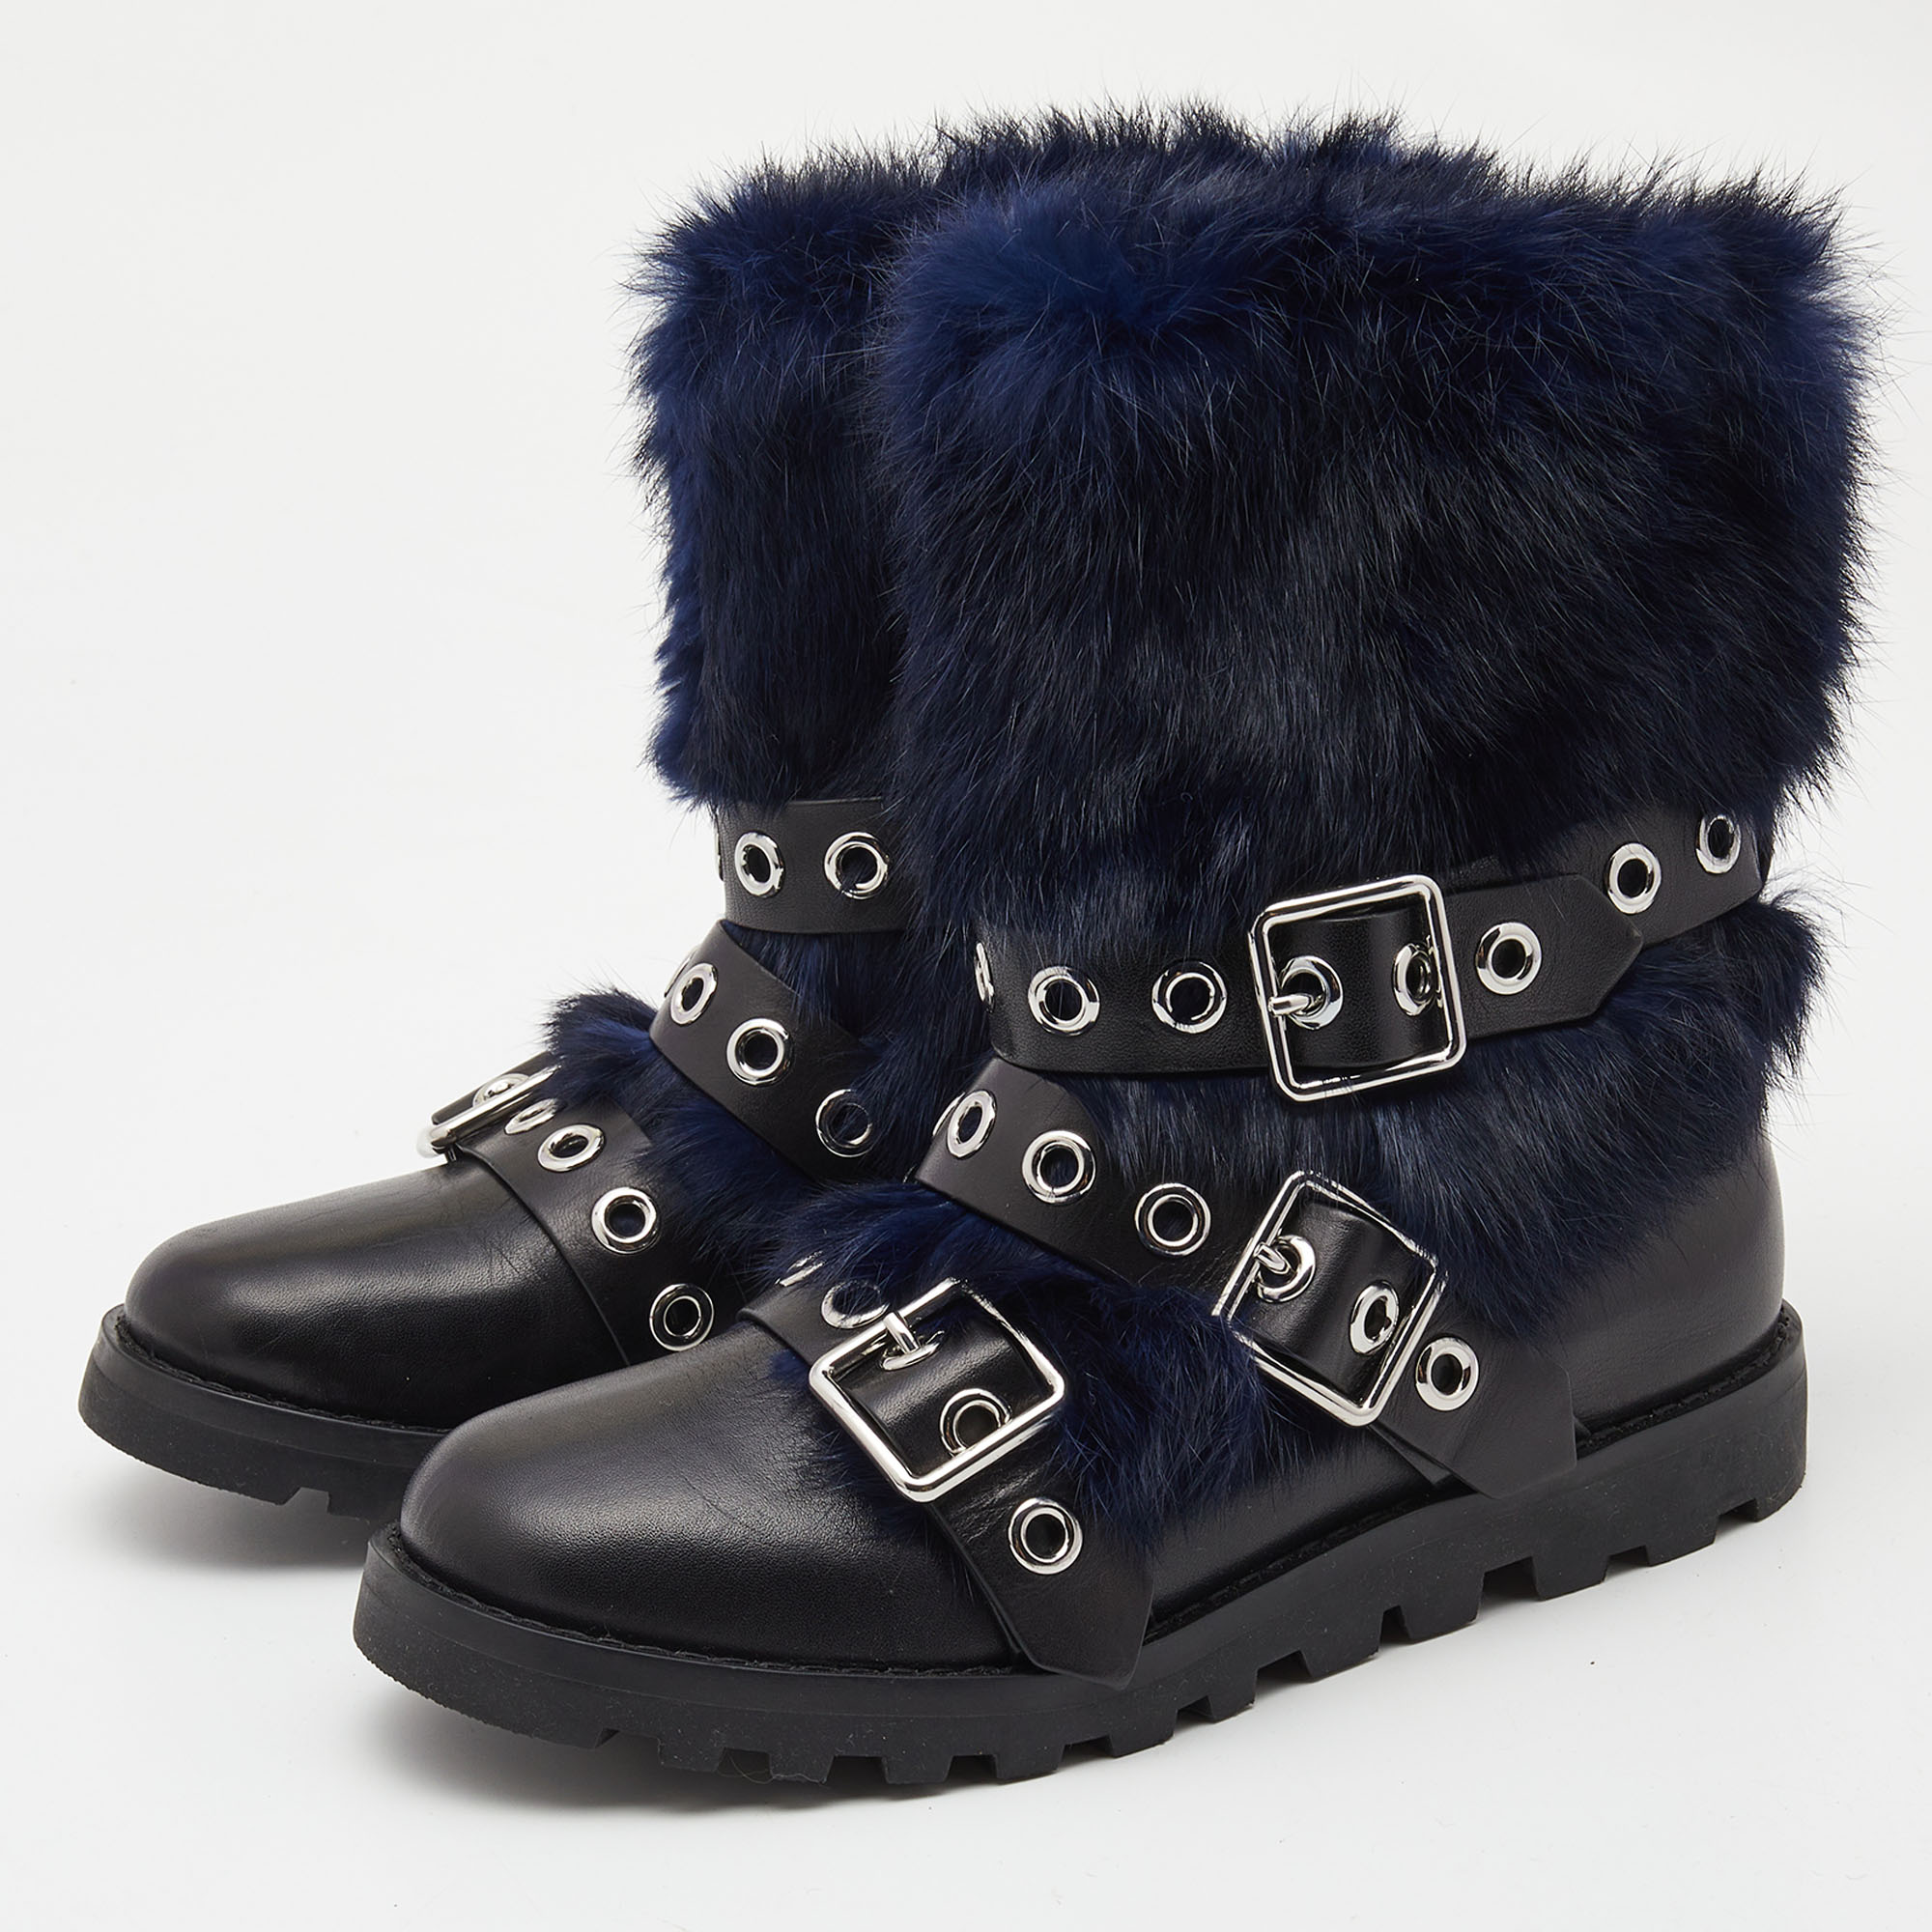 

Marc By Marc Jacobs Black/Blue Ricky Rex Rabbit Fur and Leather Buckled Moto Boots Size